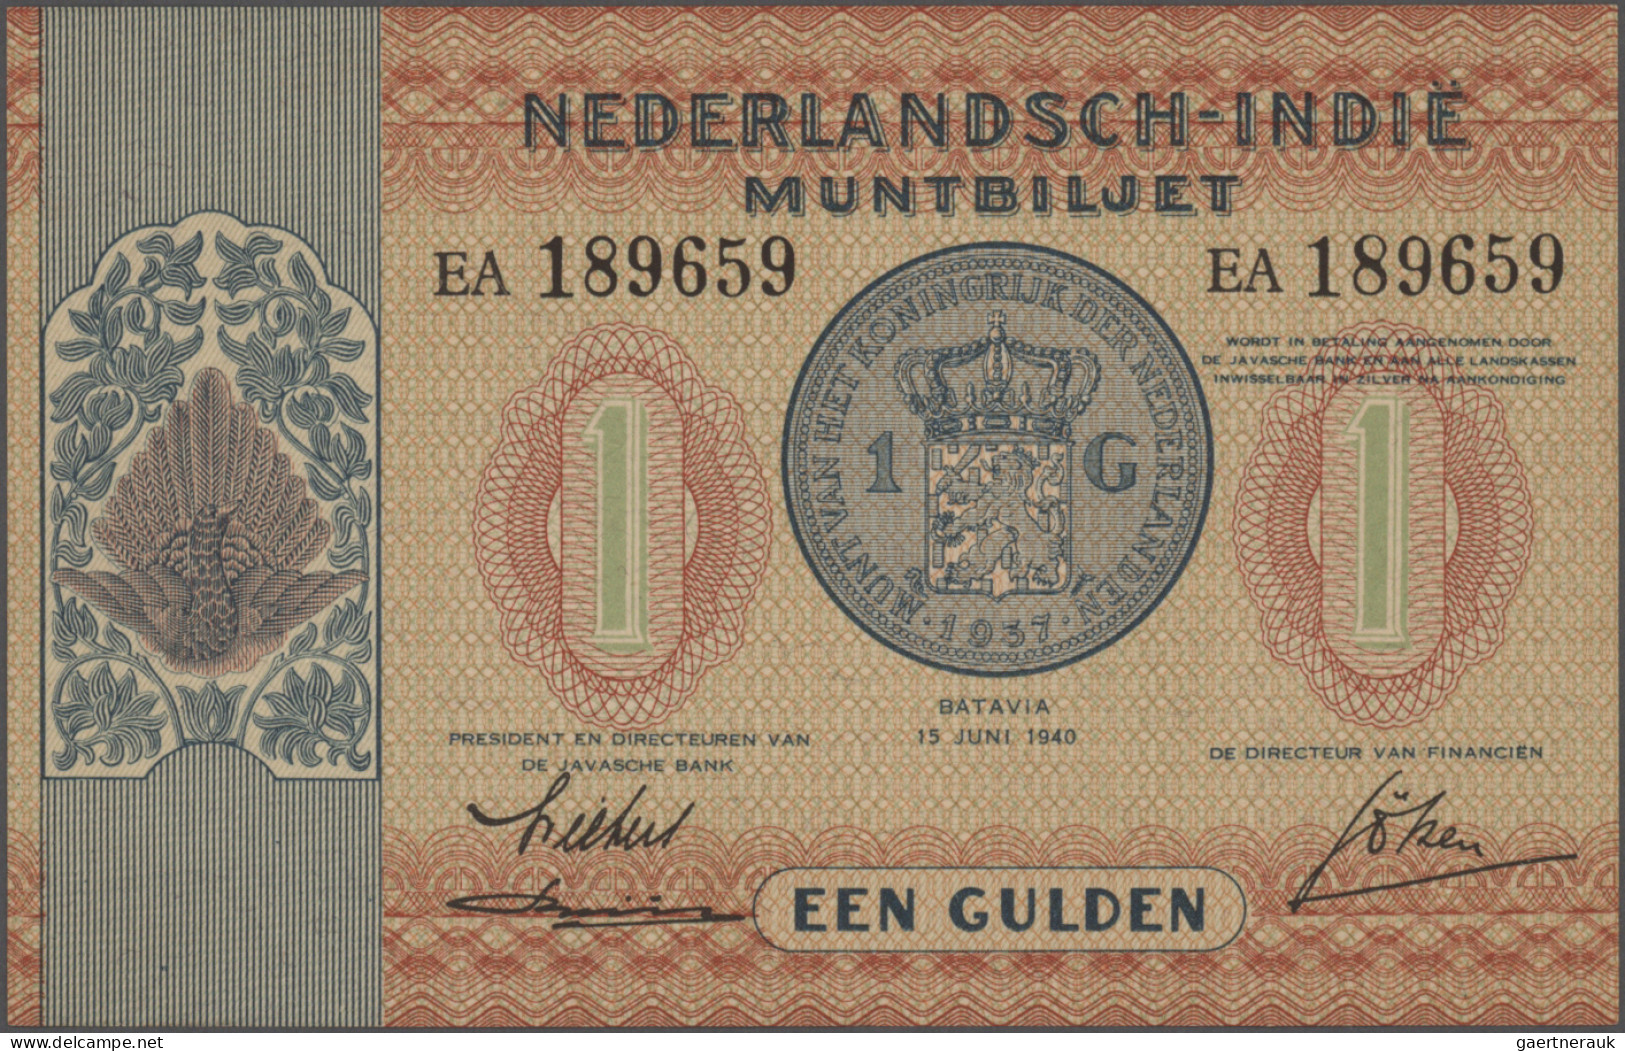 Netherlands Indies: Ministry of Finance and Javasche Bank, lot with 6 banknotes,